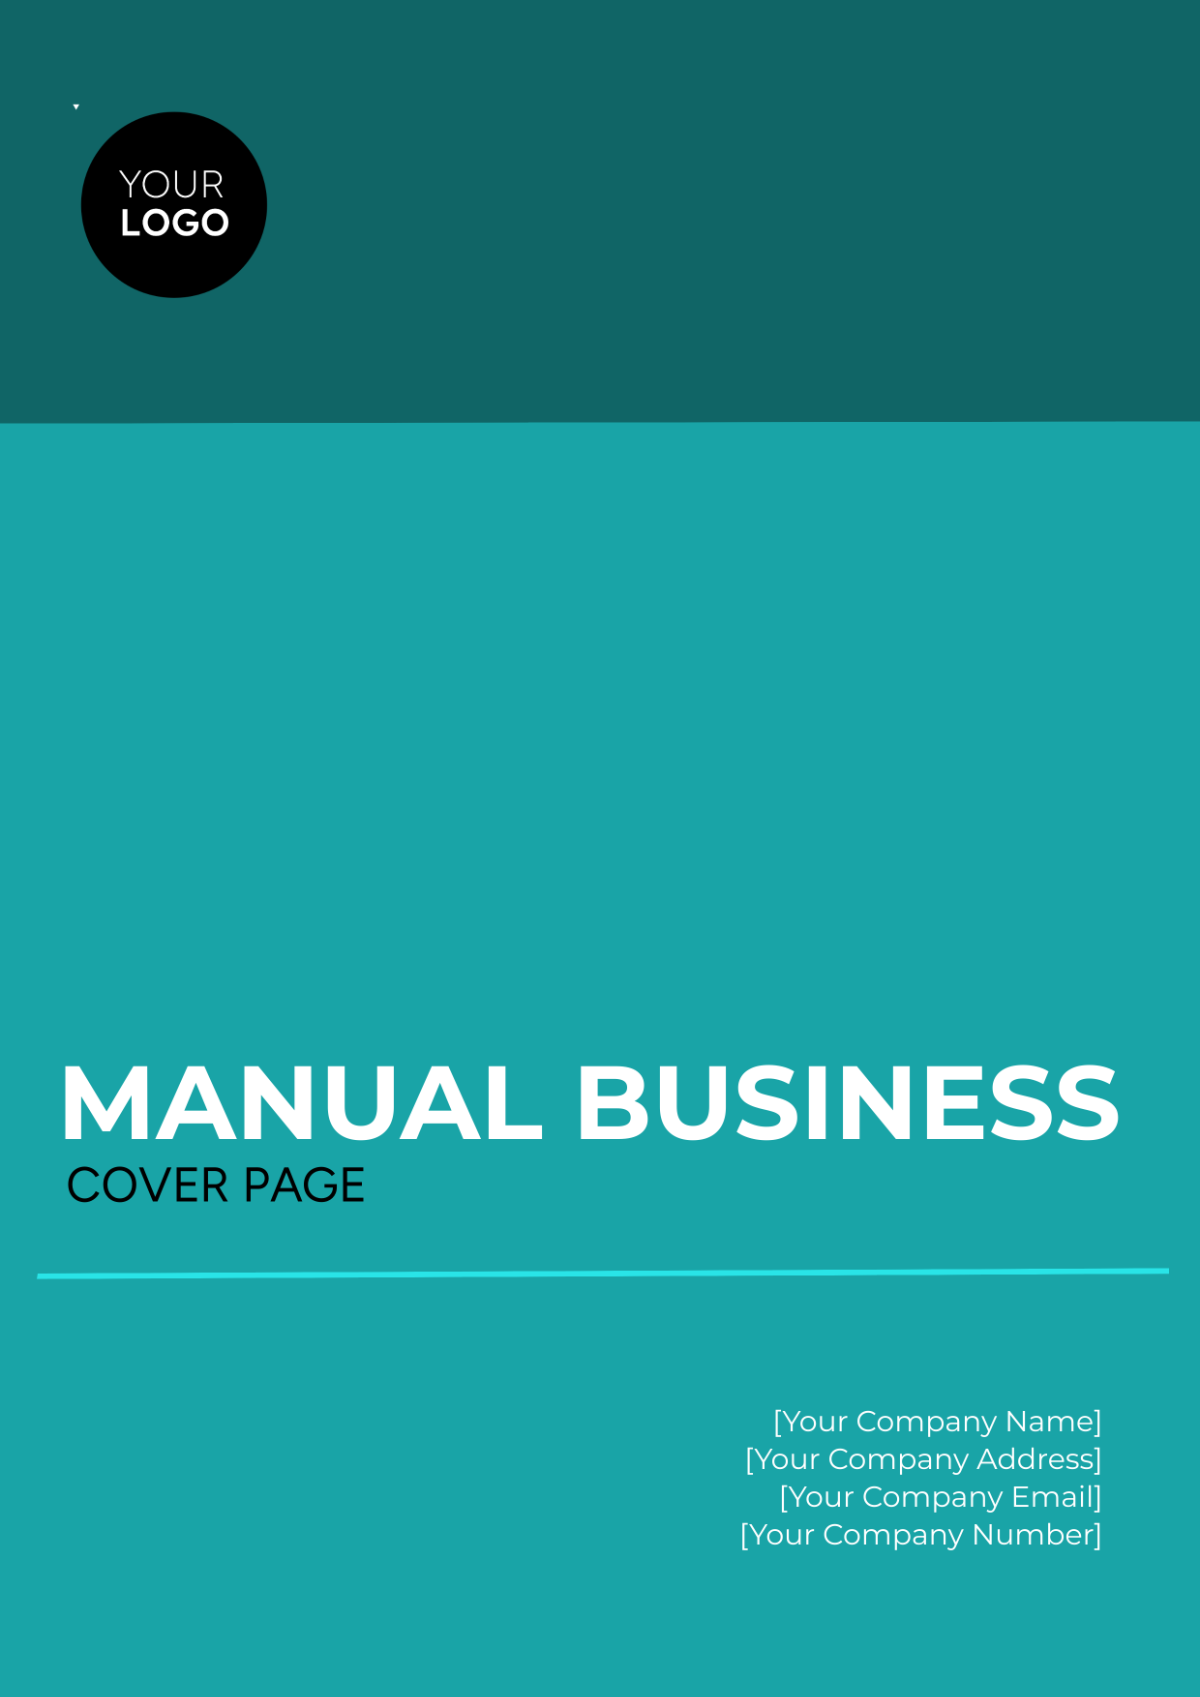 Manual Business Cover Page